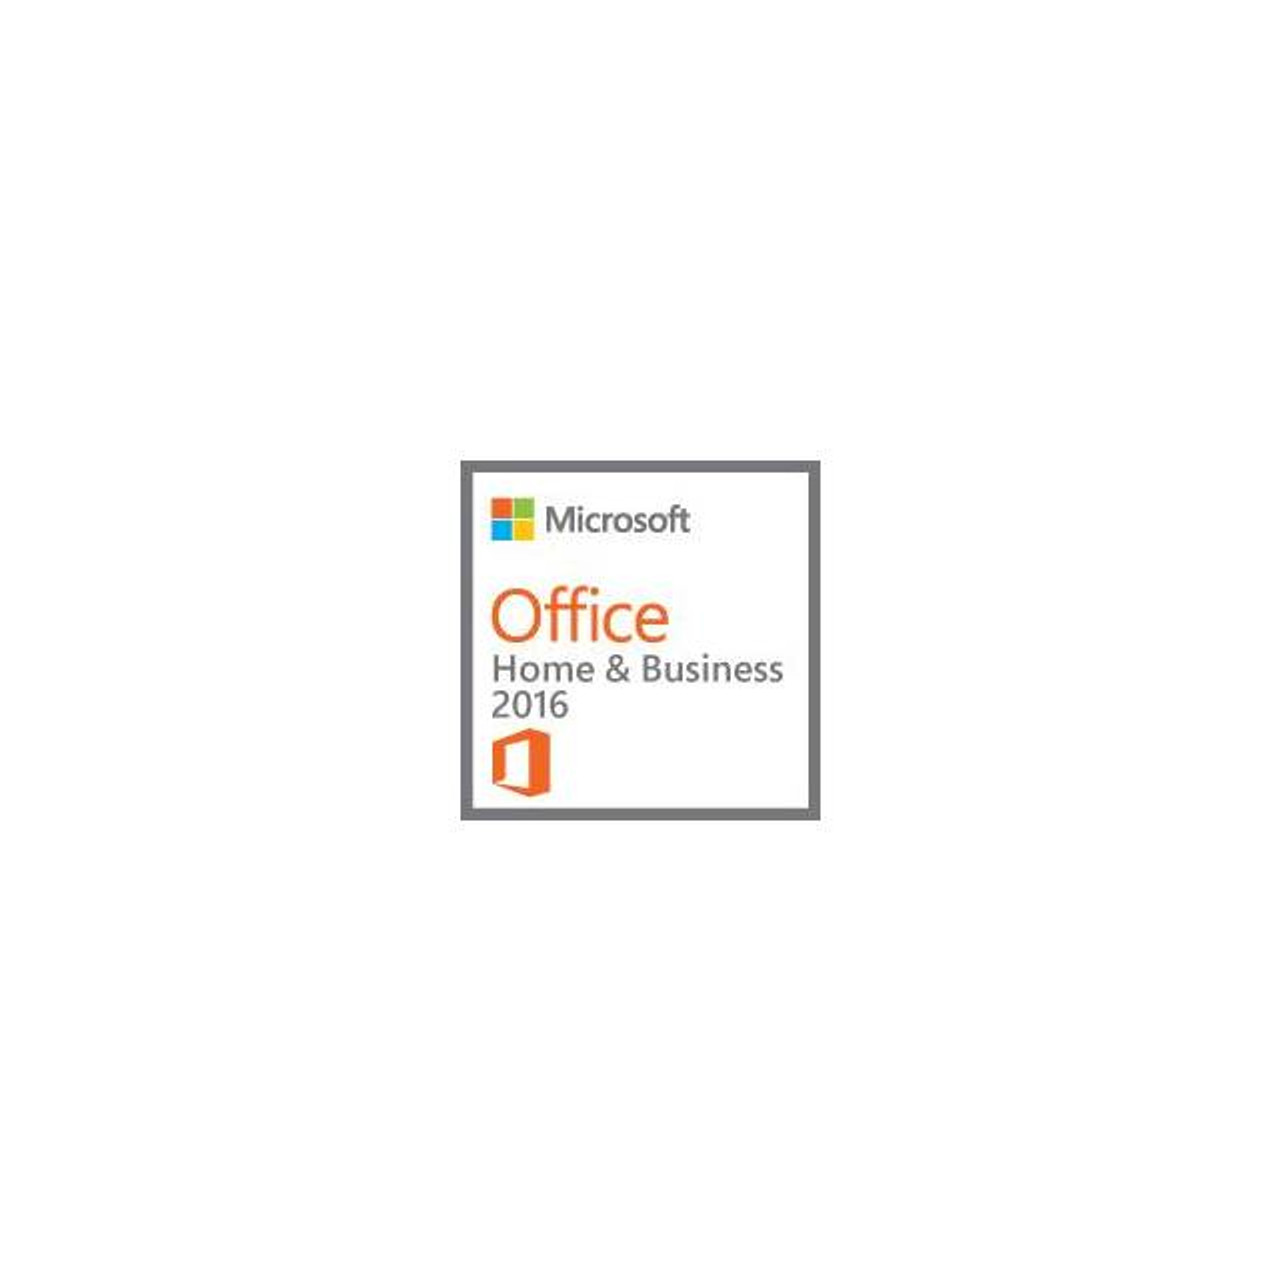 Microsoft Office Home and Business 2016 English (No Media, 1 License)